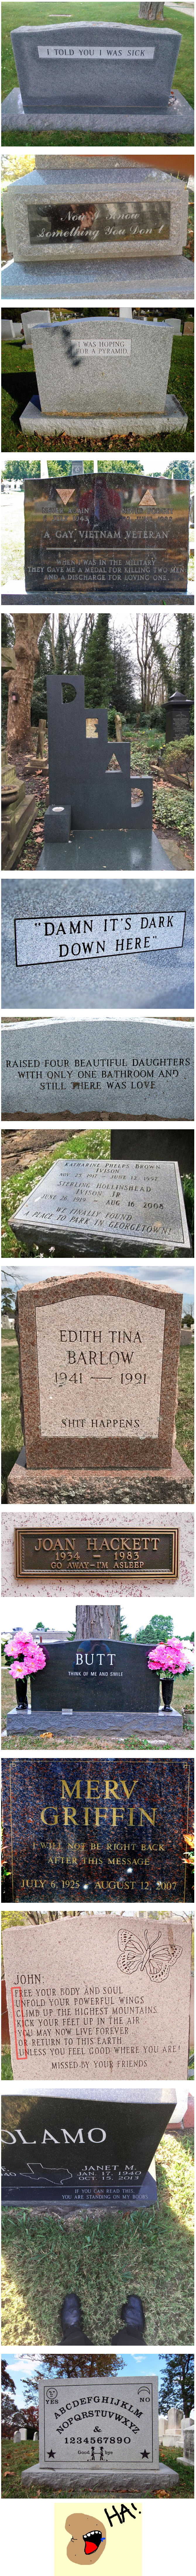 Clever Tombstones by People Whose Sense of Humor Will Live Forever